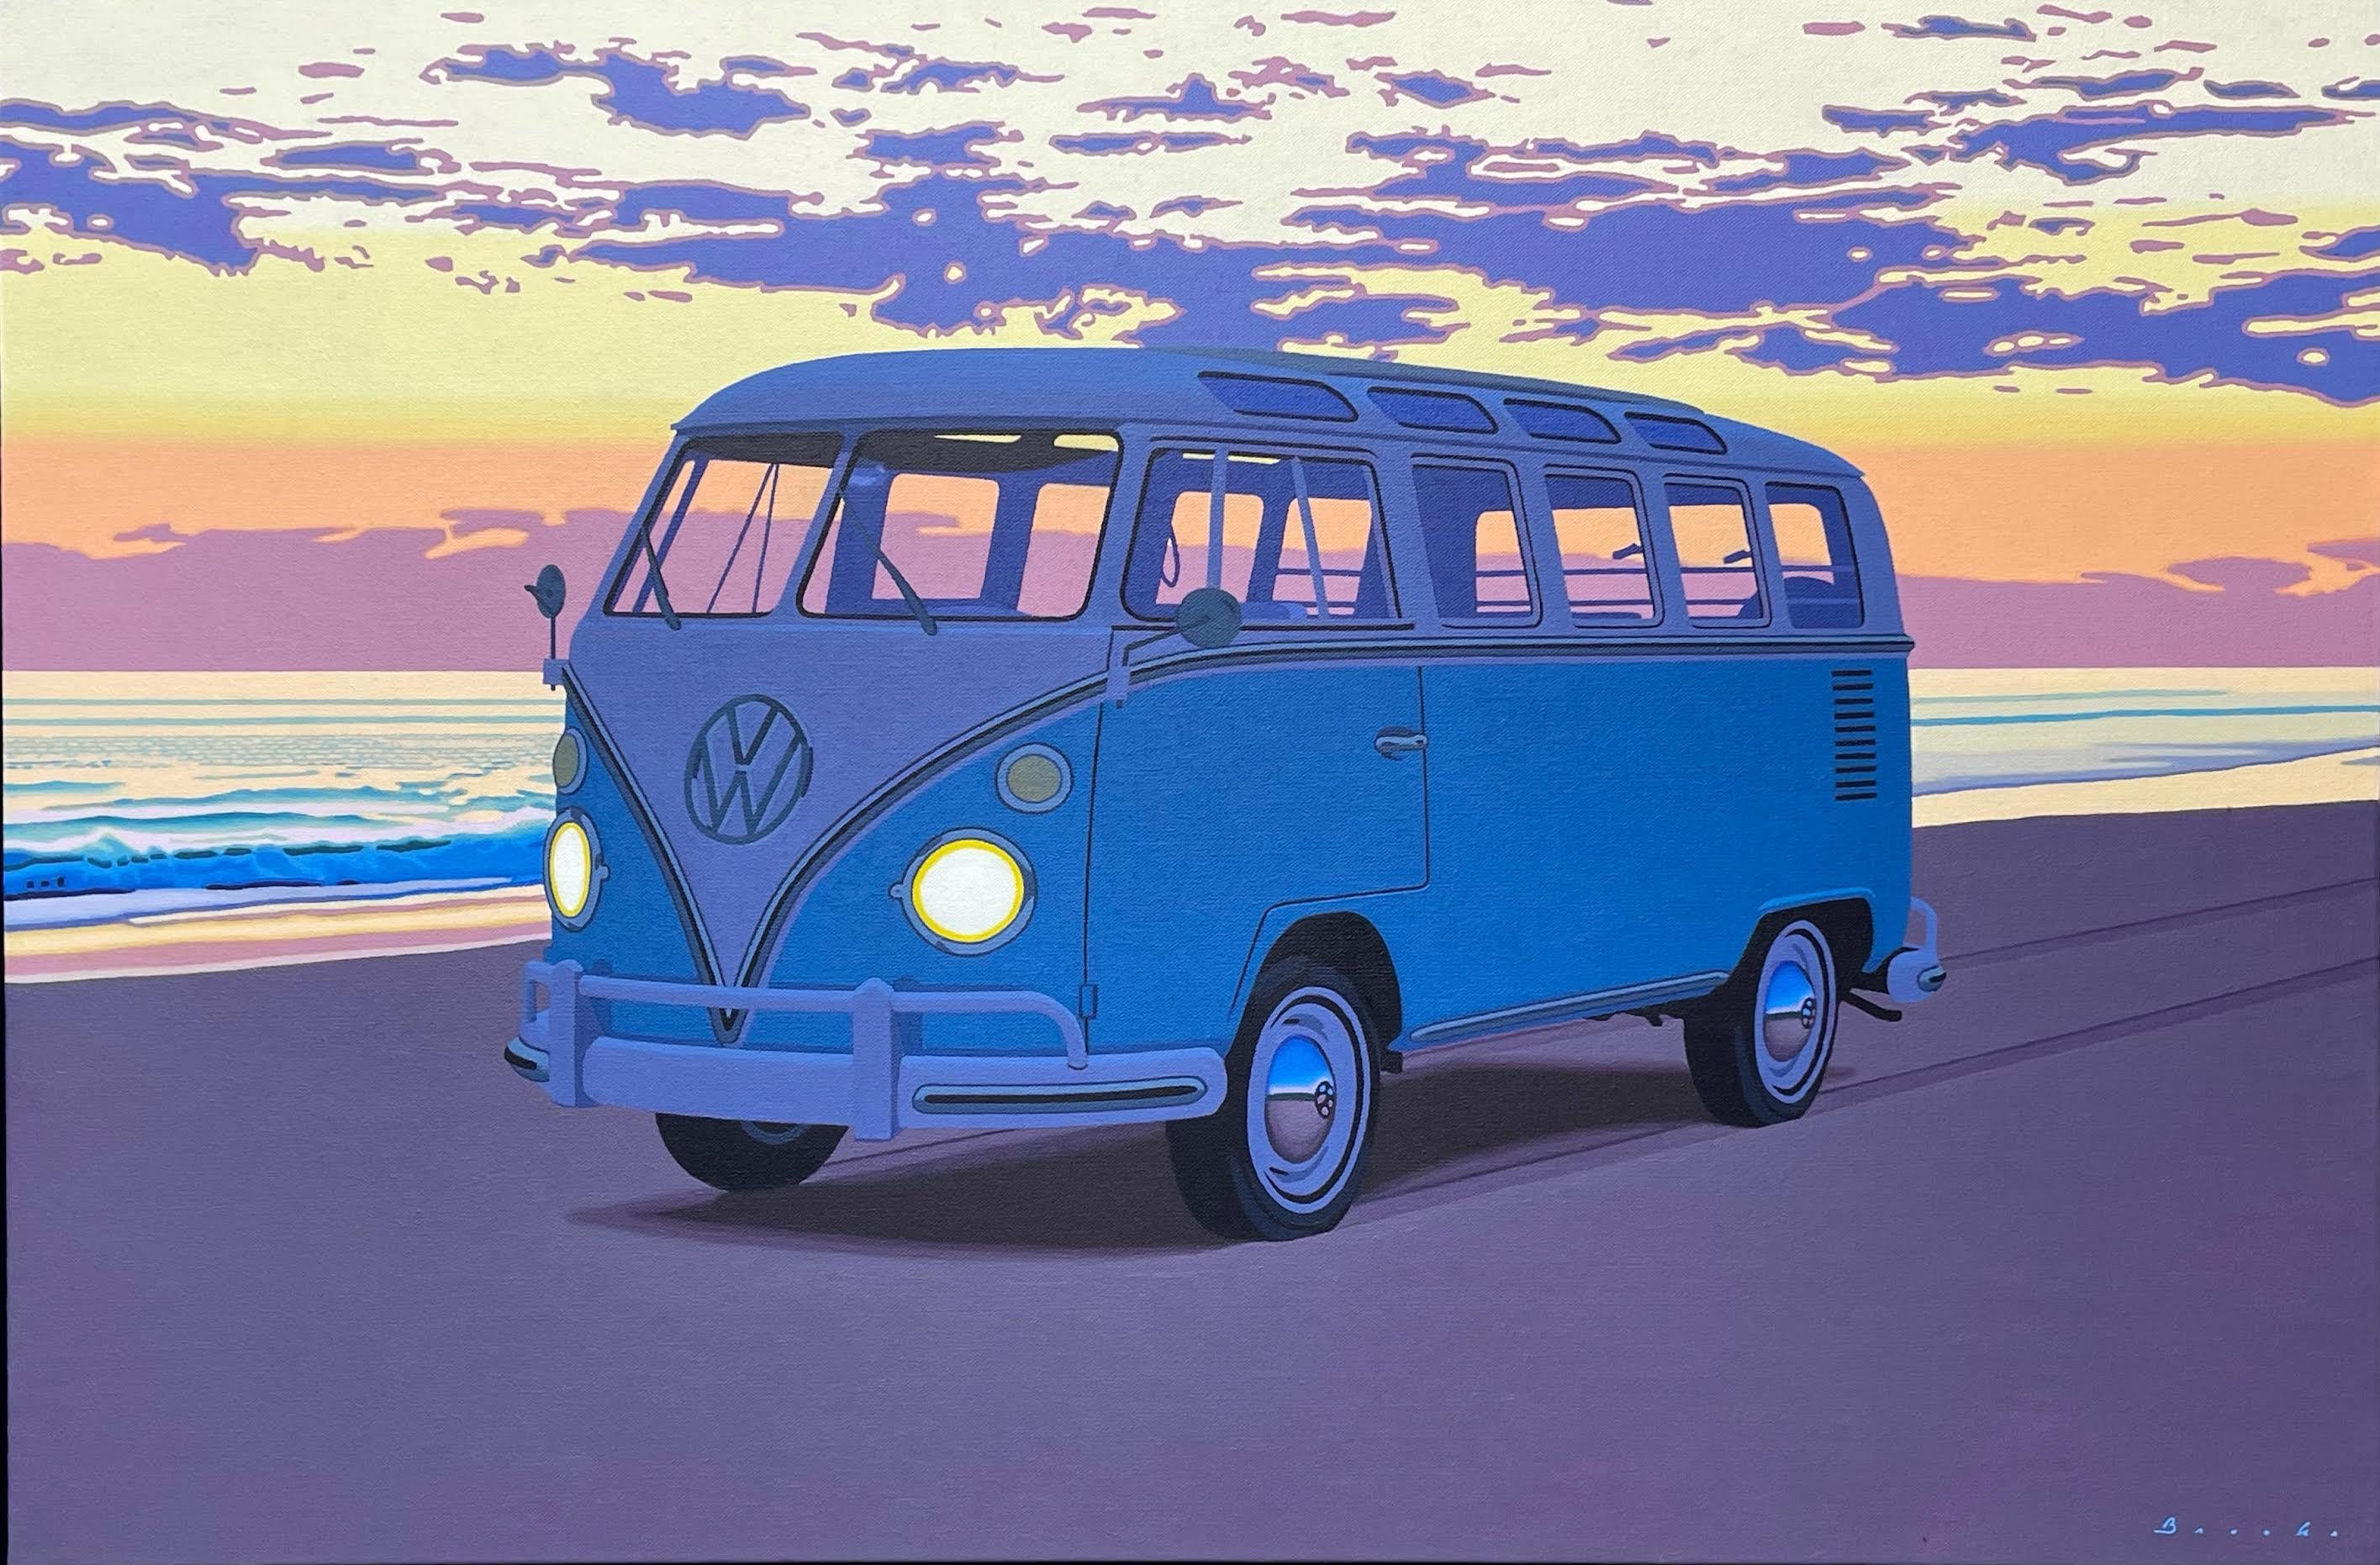 Rob Brooks Figurative Painting - "Samba After Sundown" oil painting of a blue VW bus parked on the beach, sunset